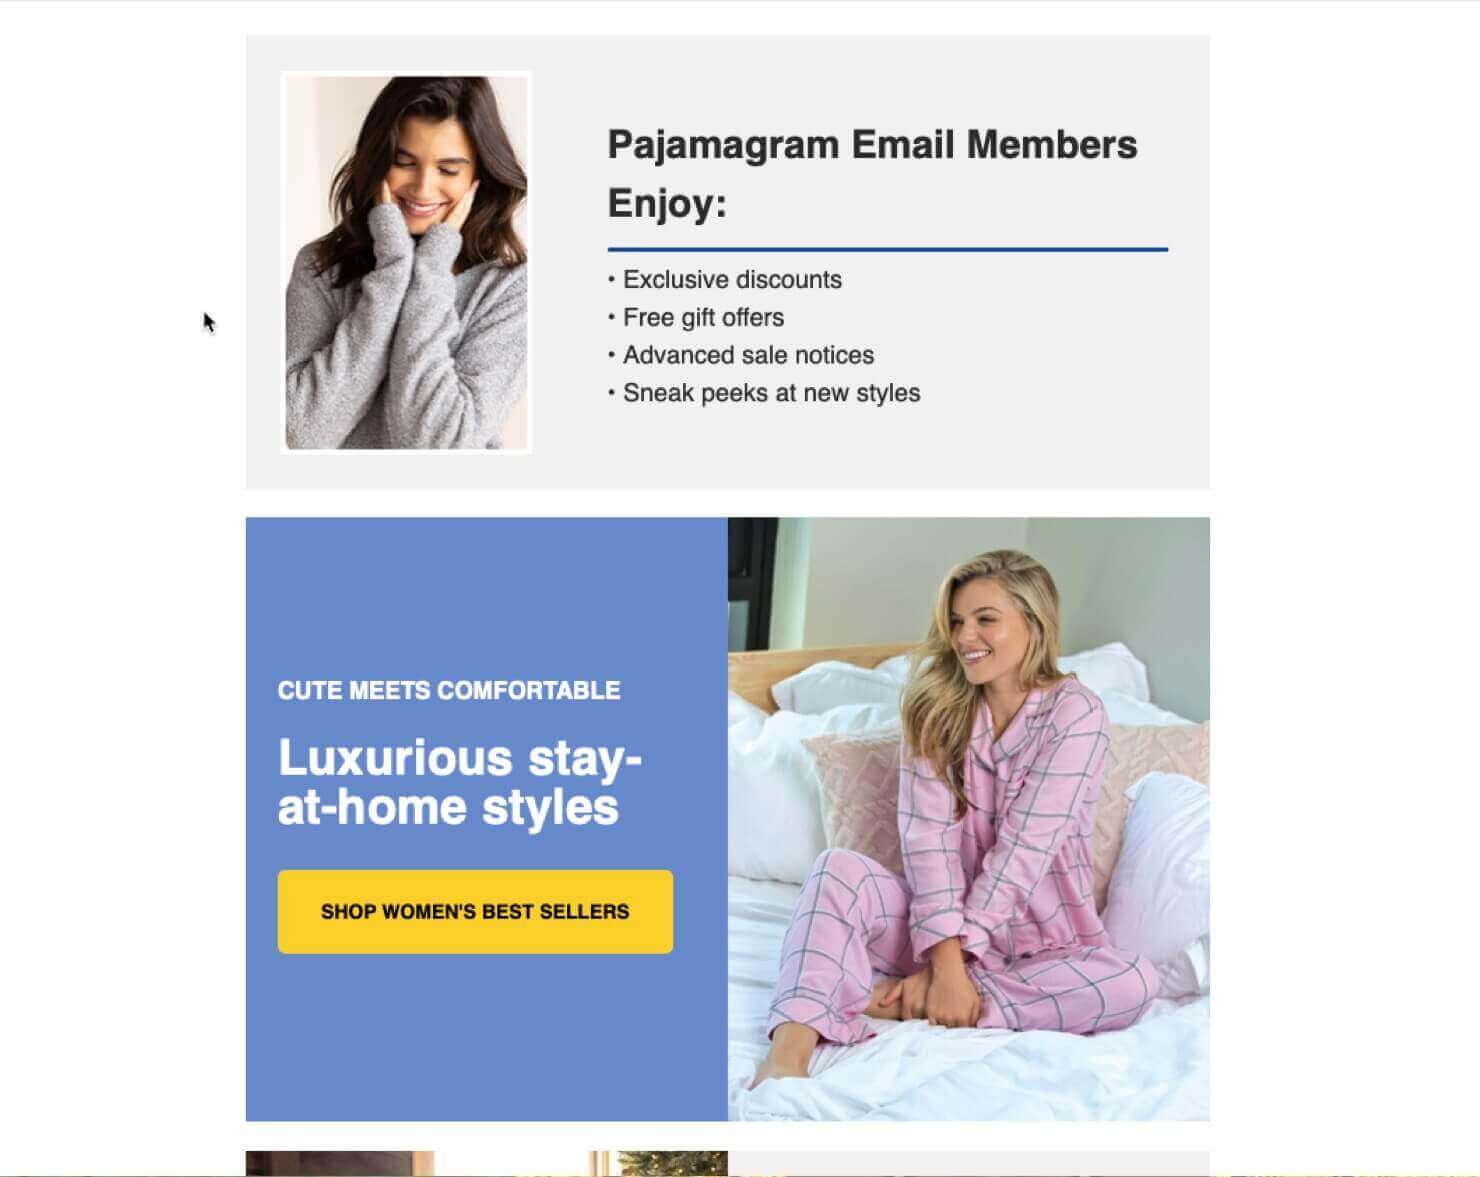 Lower part of PajamaGram's welcome email. It says "Pajamagram Email Members Enjoy: • Exclusive discounts • Free gift offers • Advanced sale notices • Sneak peeks at new styles." Then there are blocks featuring different product categories. There are photos of models wearing their products throughout the email.